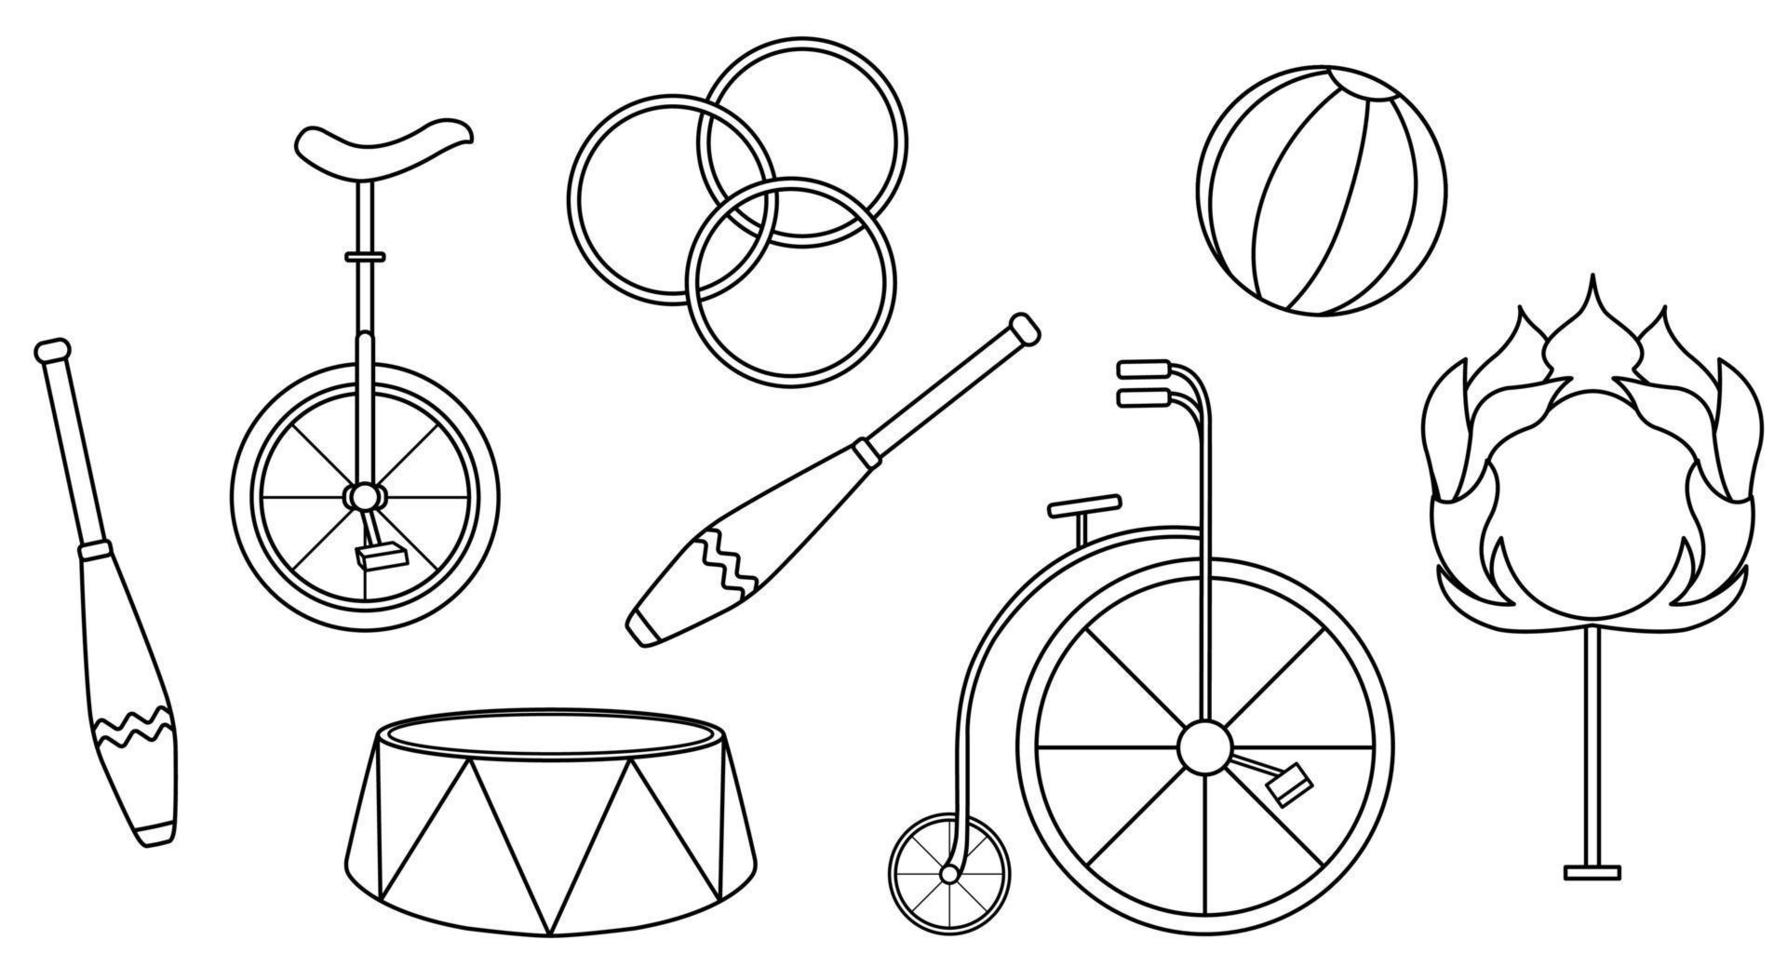 vector illustration set of circus equipment, accessories for circus, for circus performance, doodle and sketch